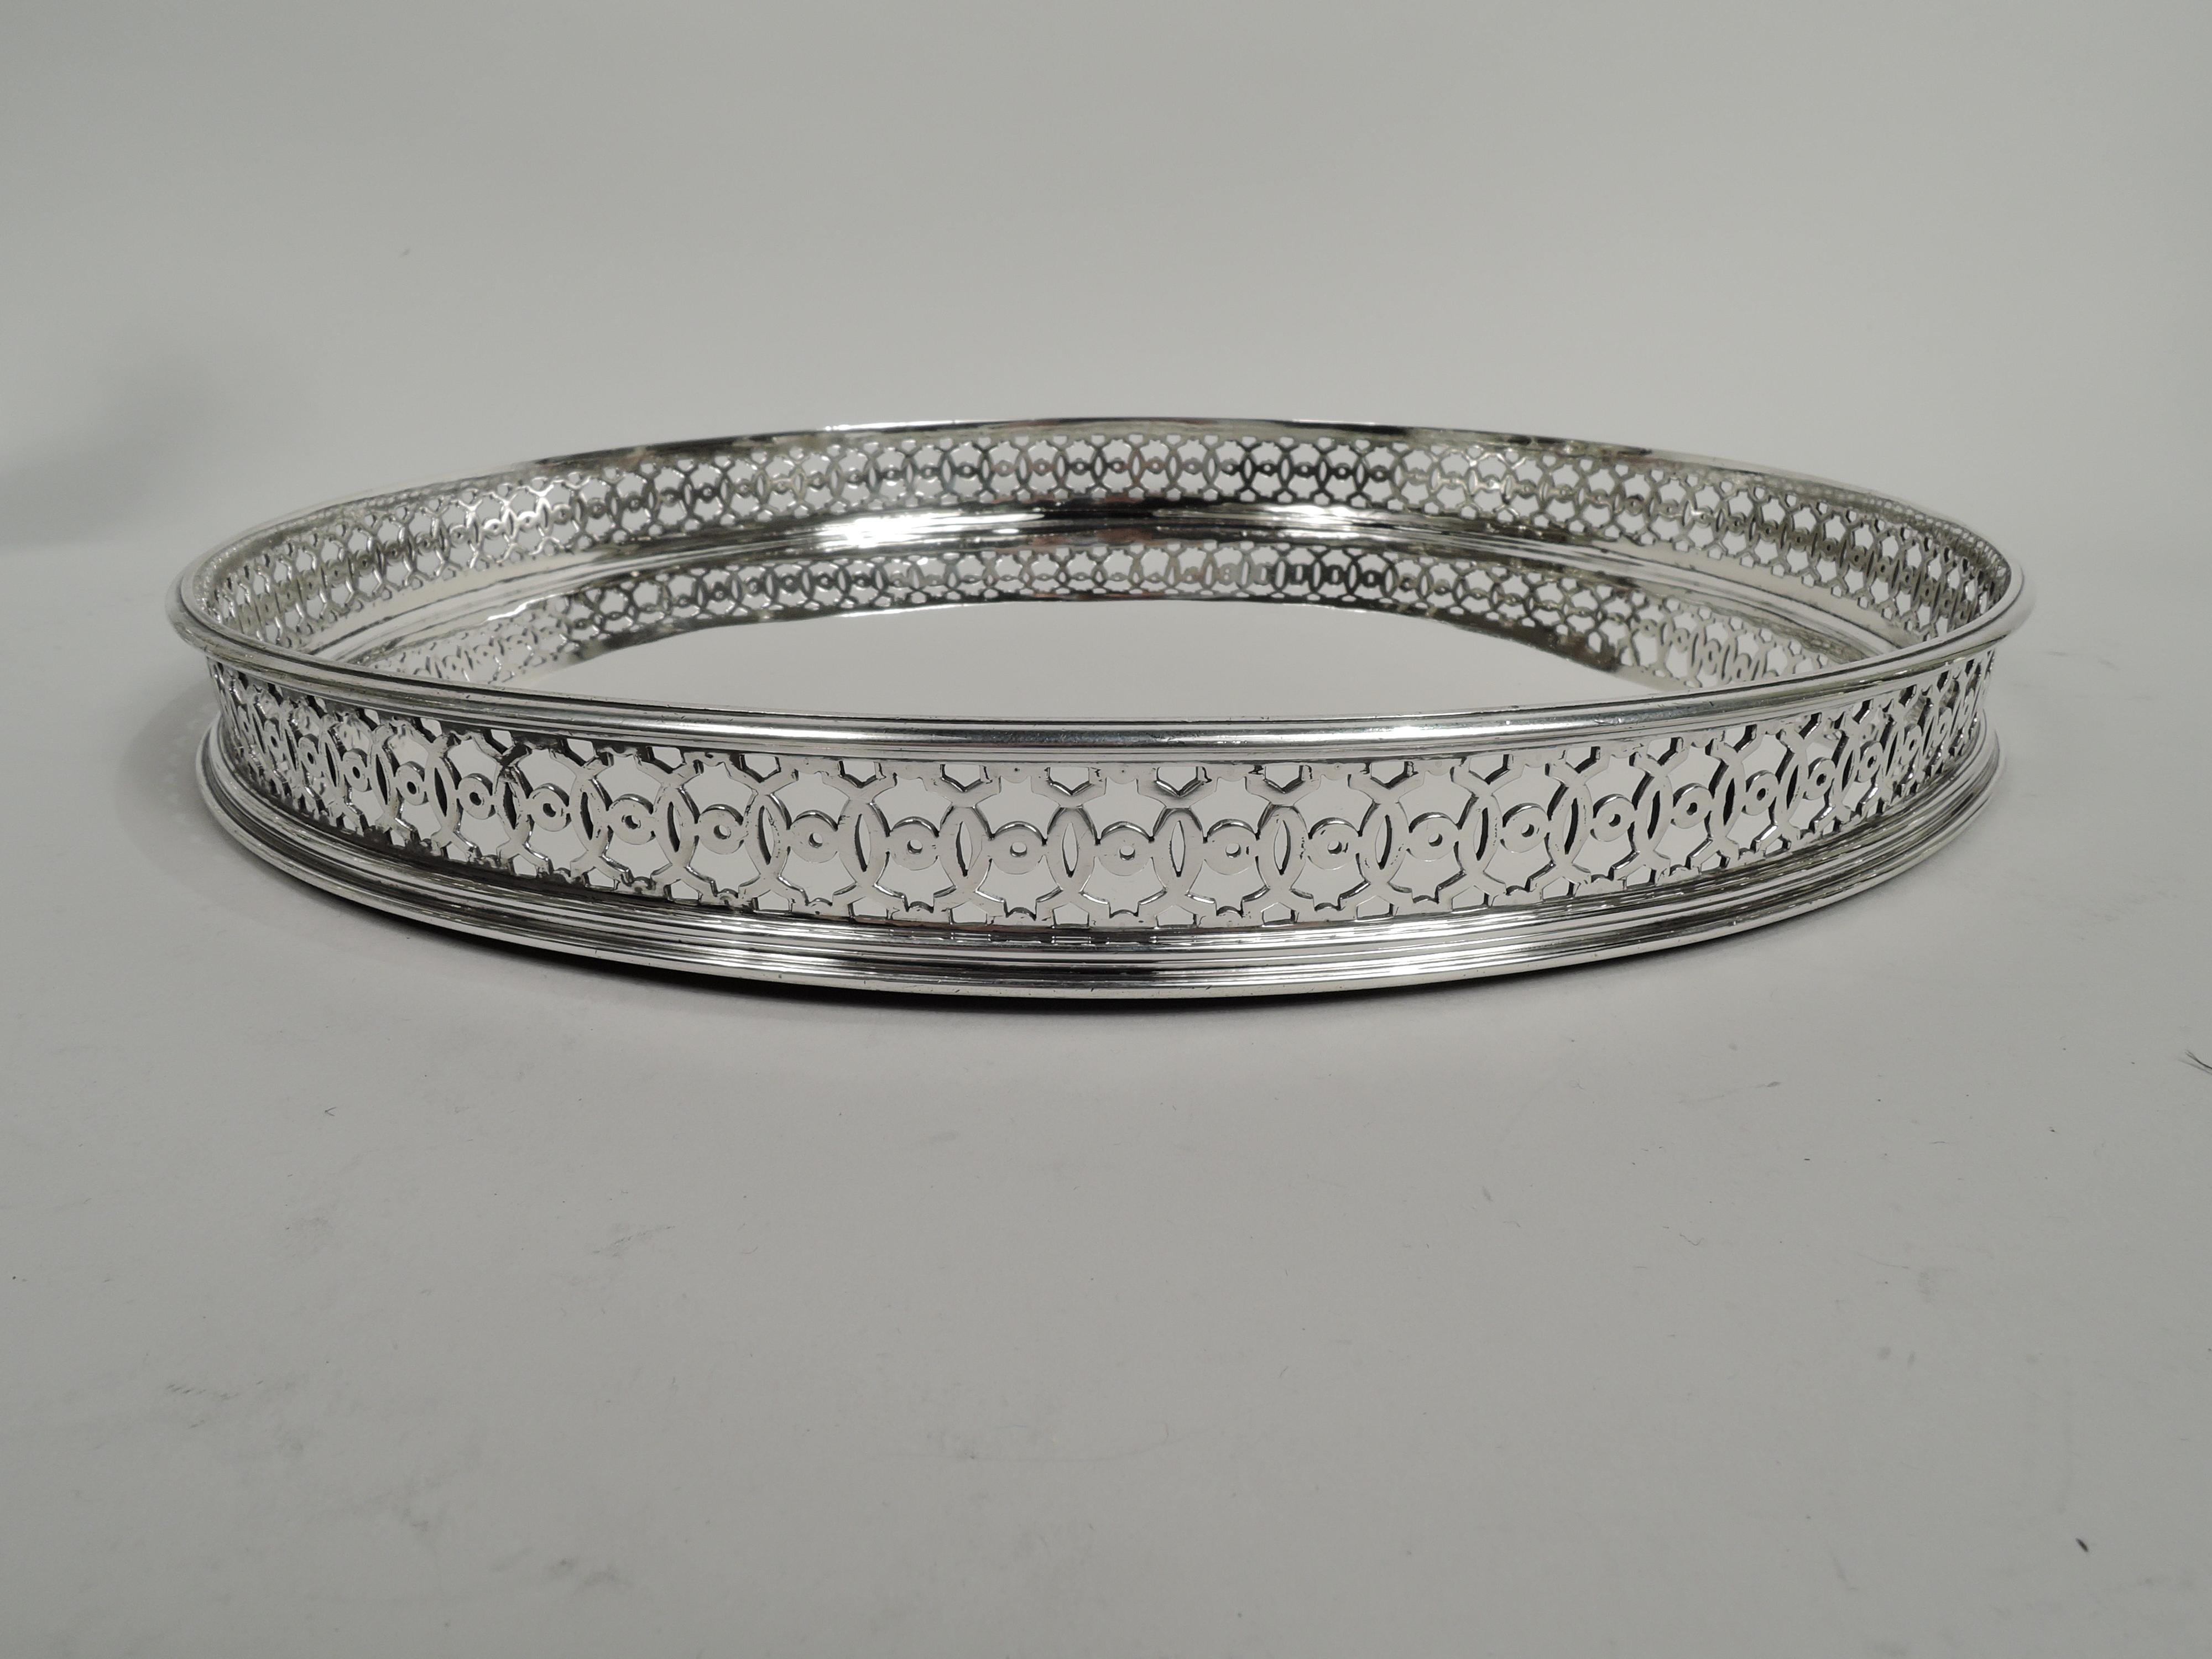 Belle Epoque Classical 950 silver tray. Made by Gustave Keller in Paris, ca 1910. Circular well and open gallery sides with interlaced circles joined by small circles. Fully marked including maker’s stamp. Weight: 30.7 troy ounces.